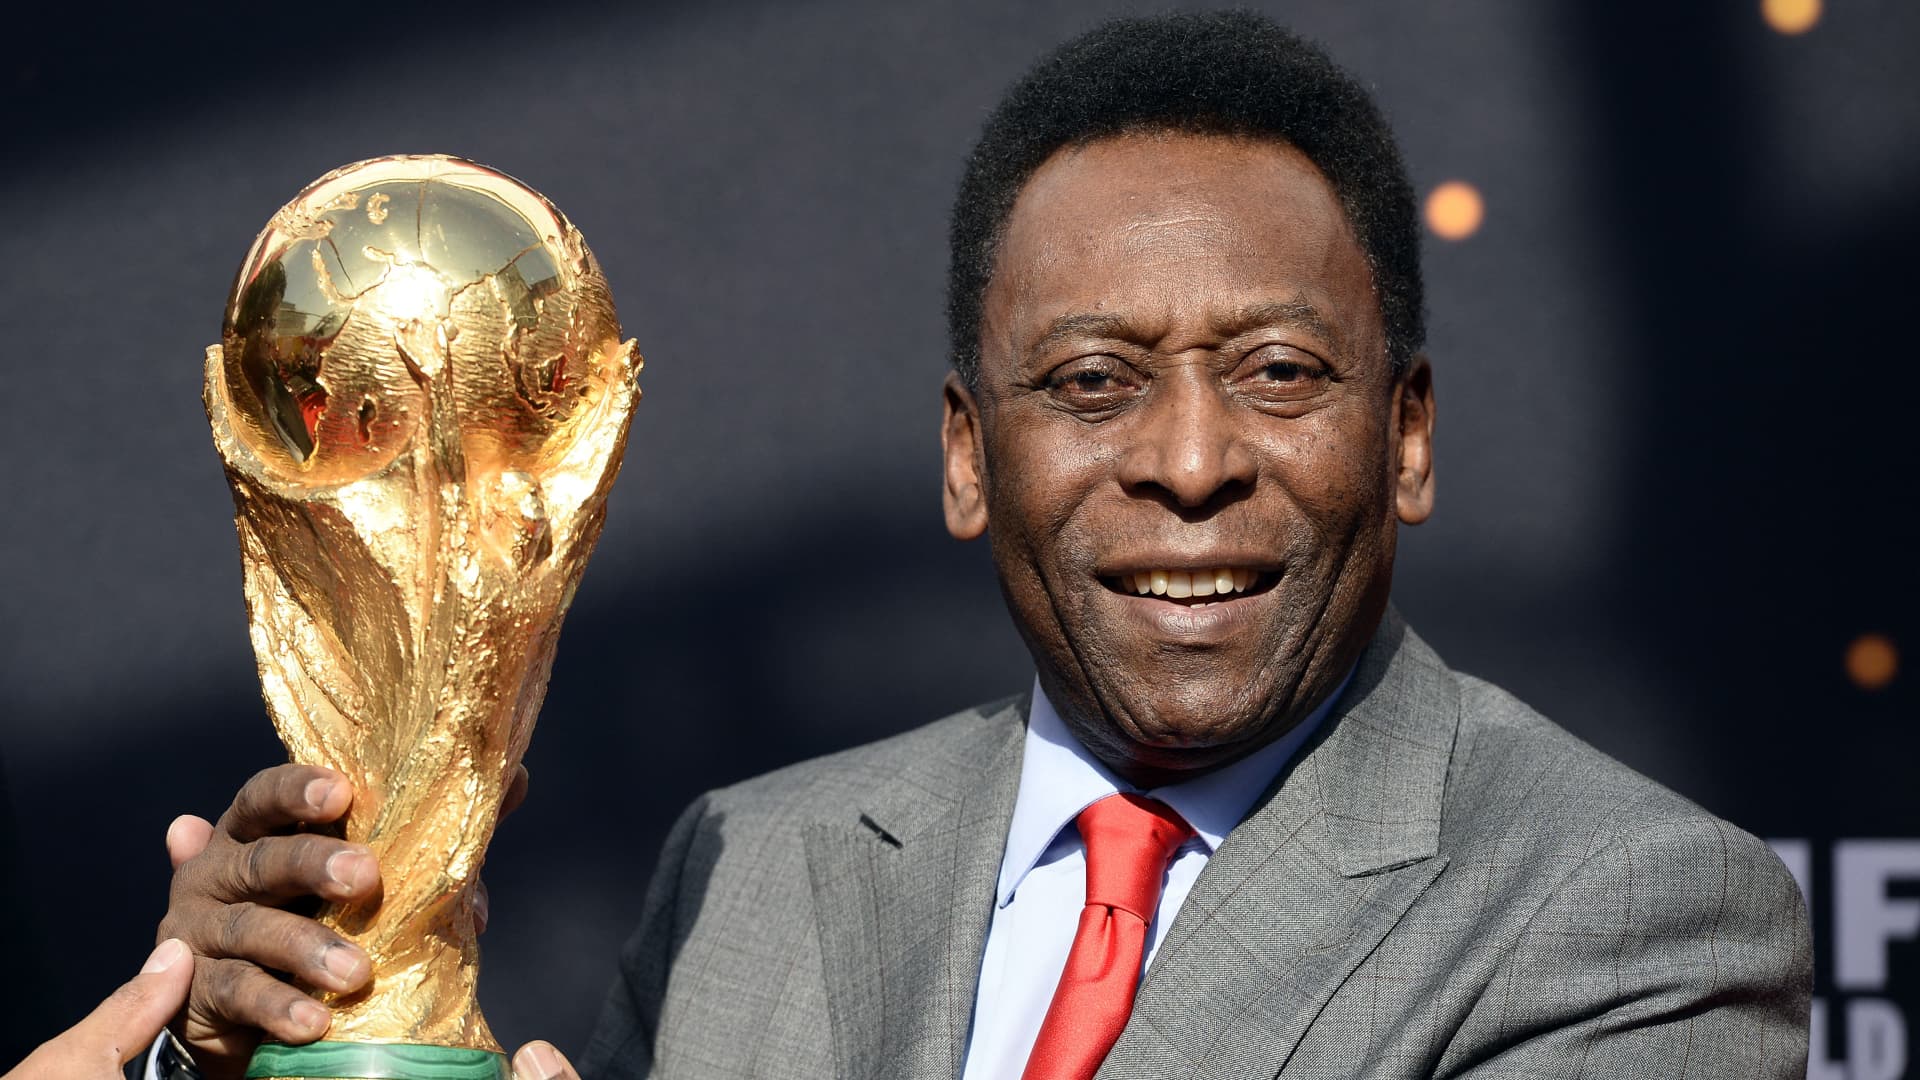 Photo of Pelé, Brazilian soccer star and only player to win the World Cup three times, dies at age 82